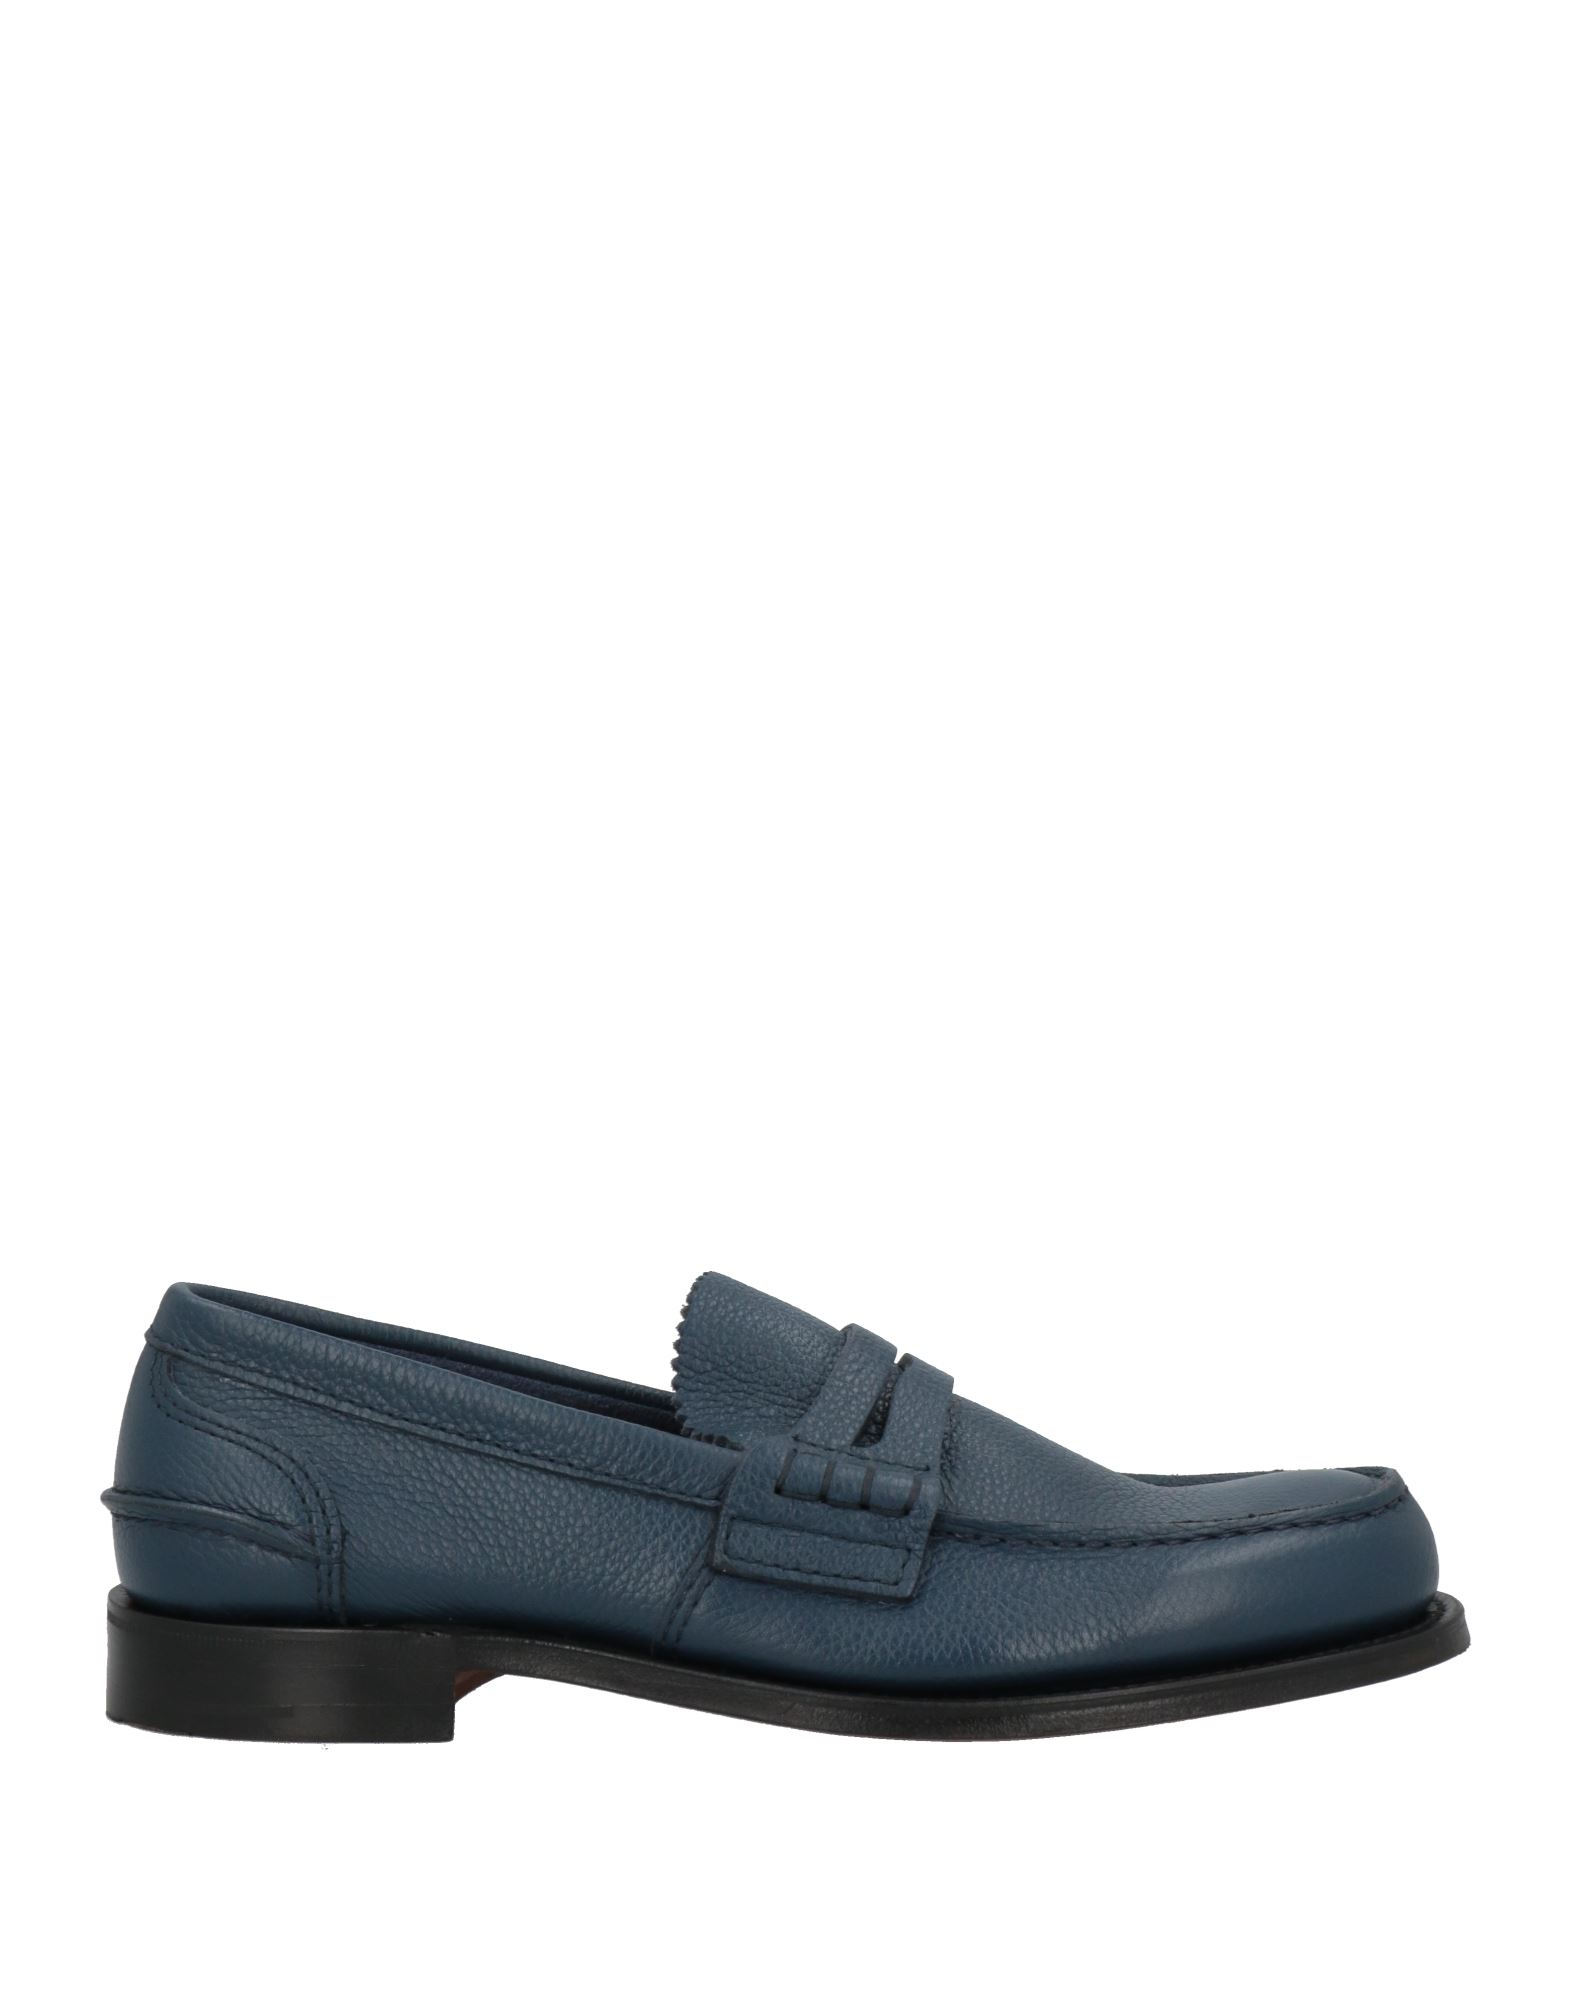 CHURCH'S CHURCH'S MAN LOAFERS NAVY BLUE SIZE 10.5 SOFT LEATHER